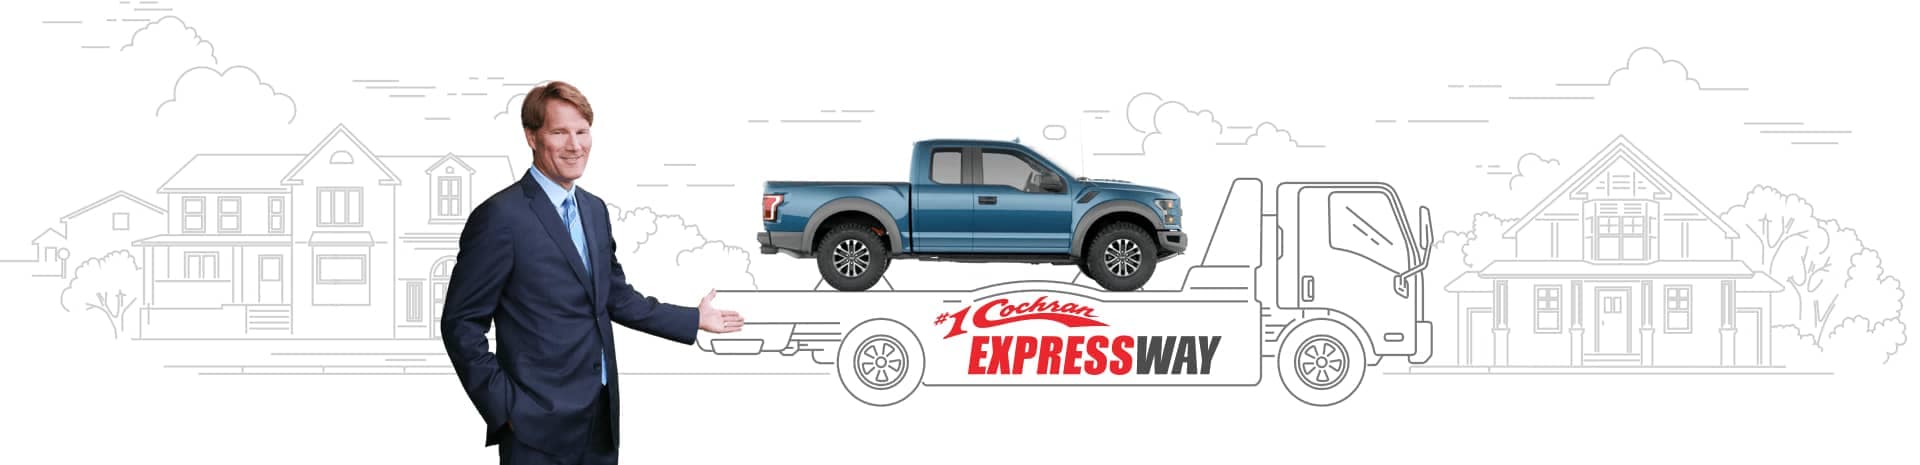 Cochran expressway banner with a car on a truck